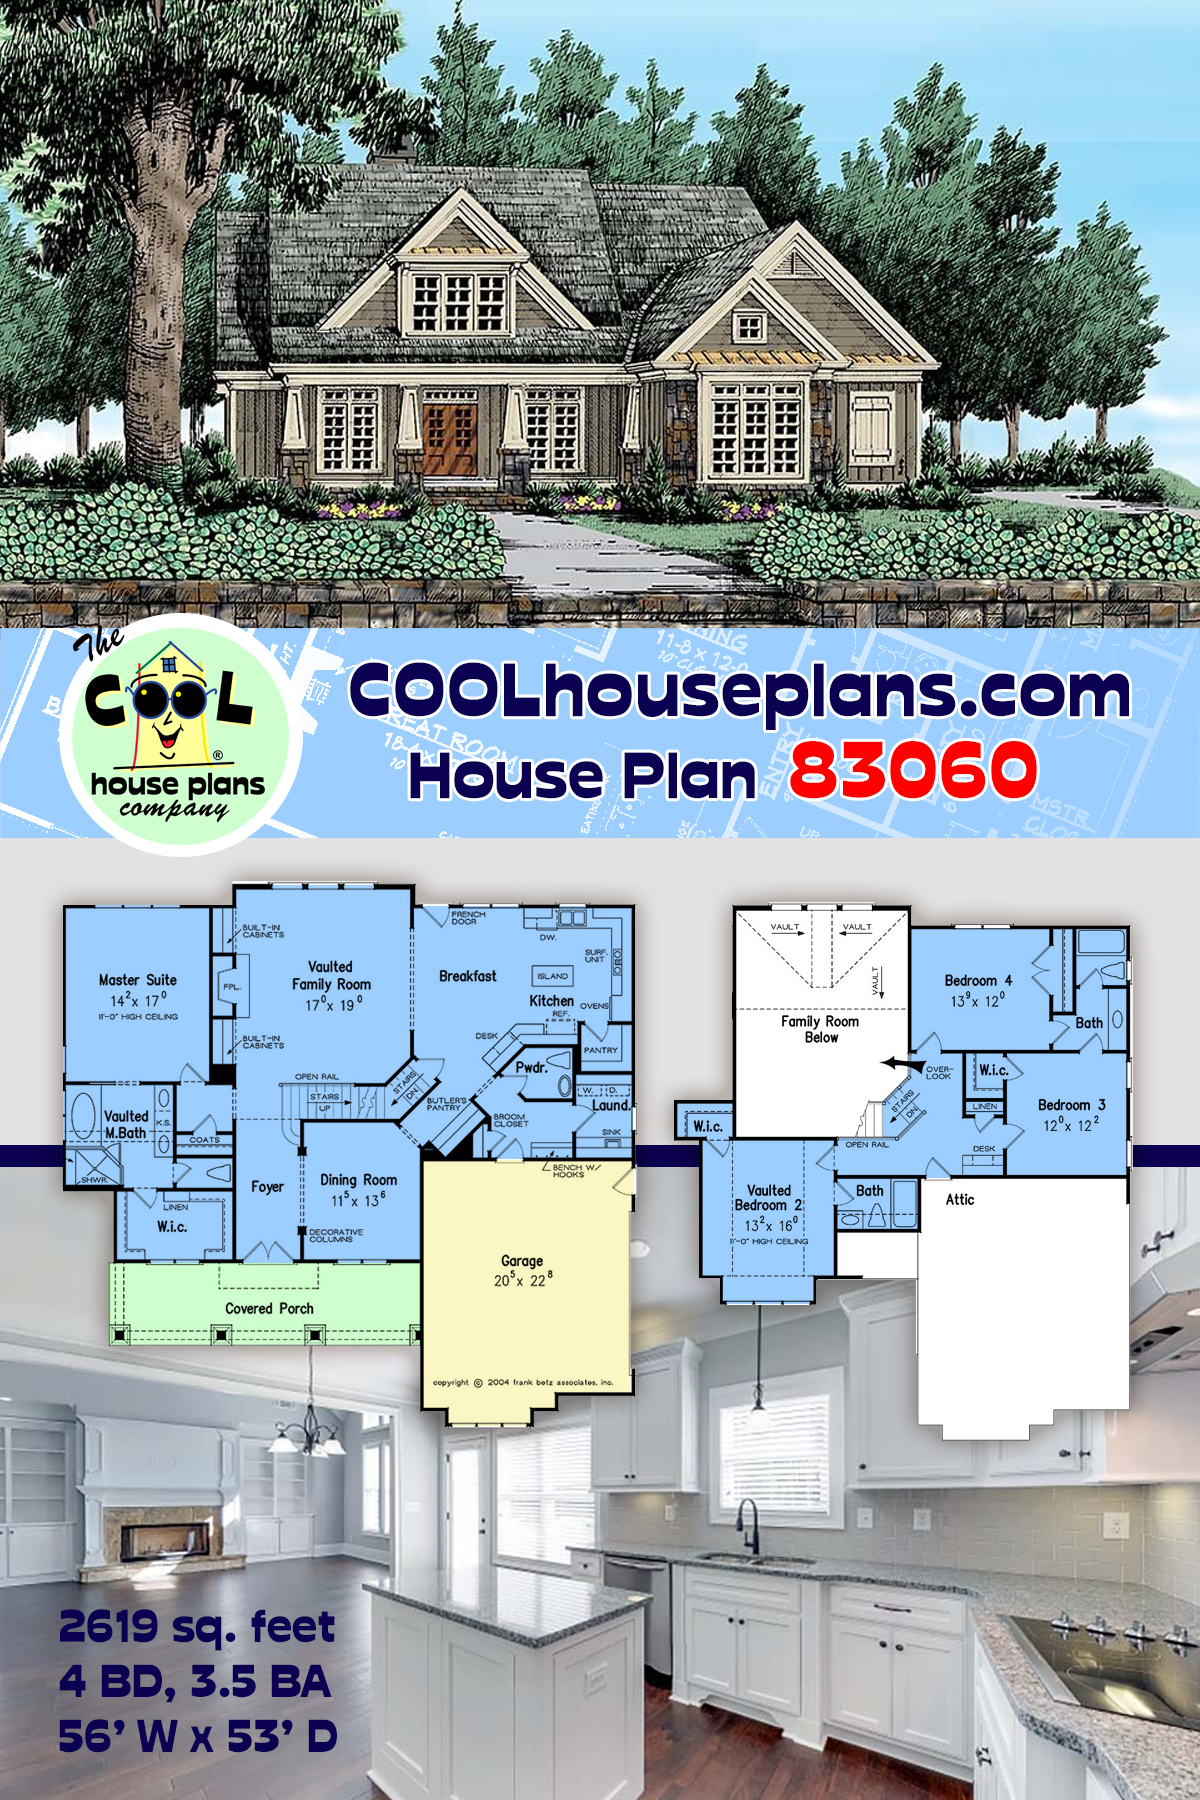 Bungalow, Craftsman, Traditional House Plan 83060 with 4 Beds, 4 Baths, 2 Car Garage